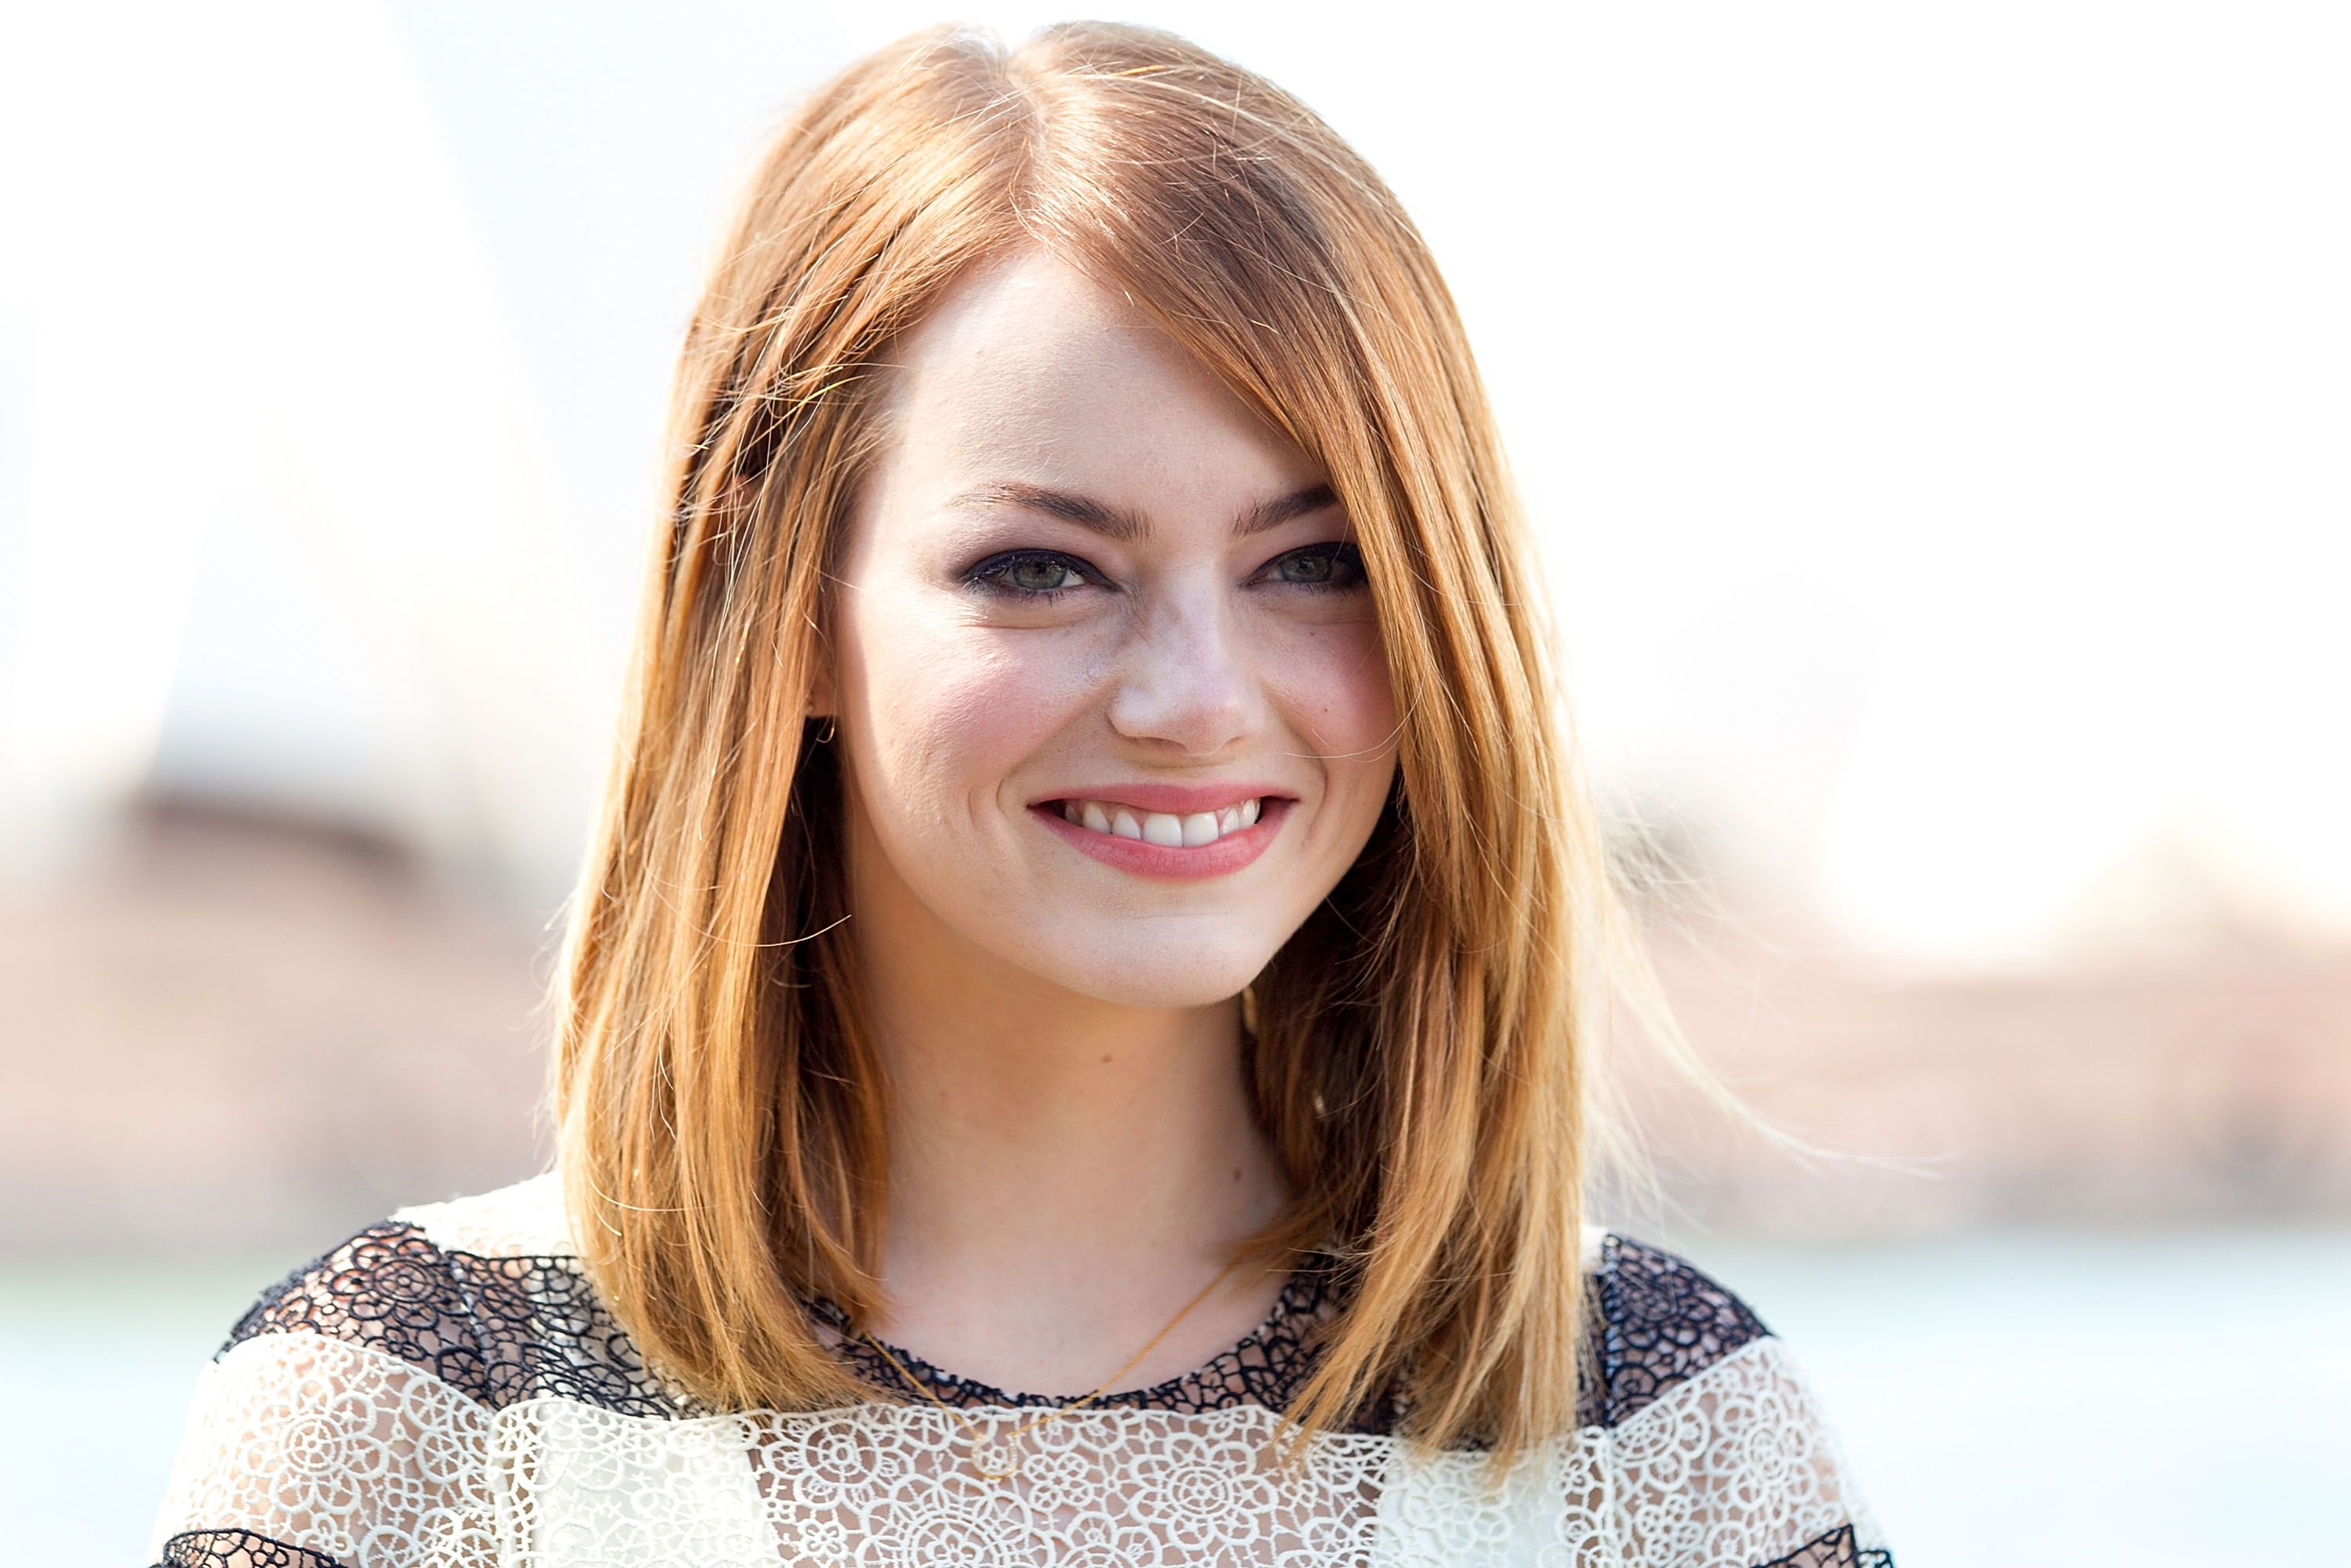 Look: Emma Stone Rewears One Of Her Wedding Dresses To The 2022